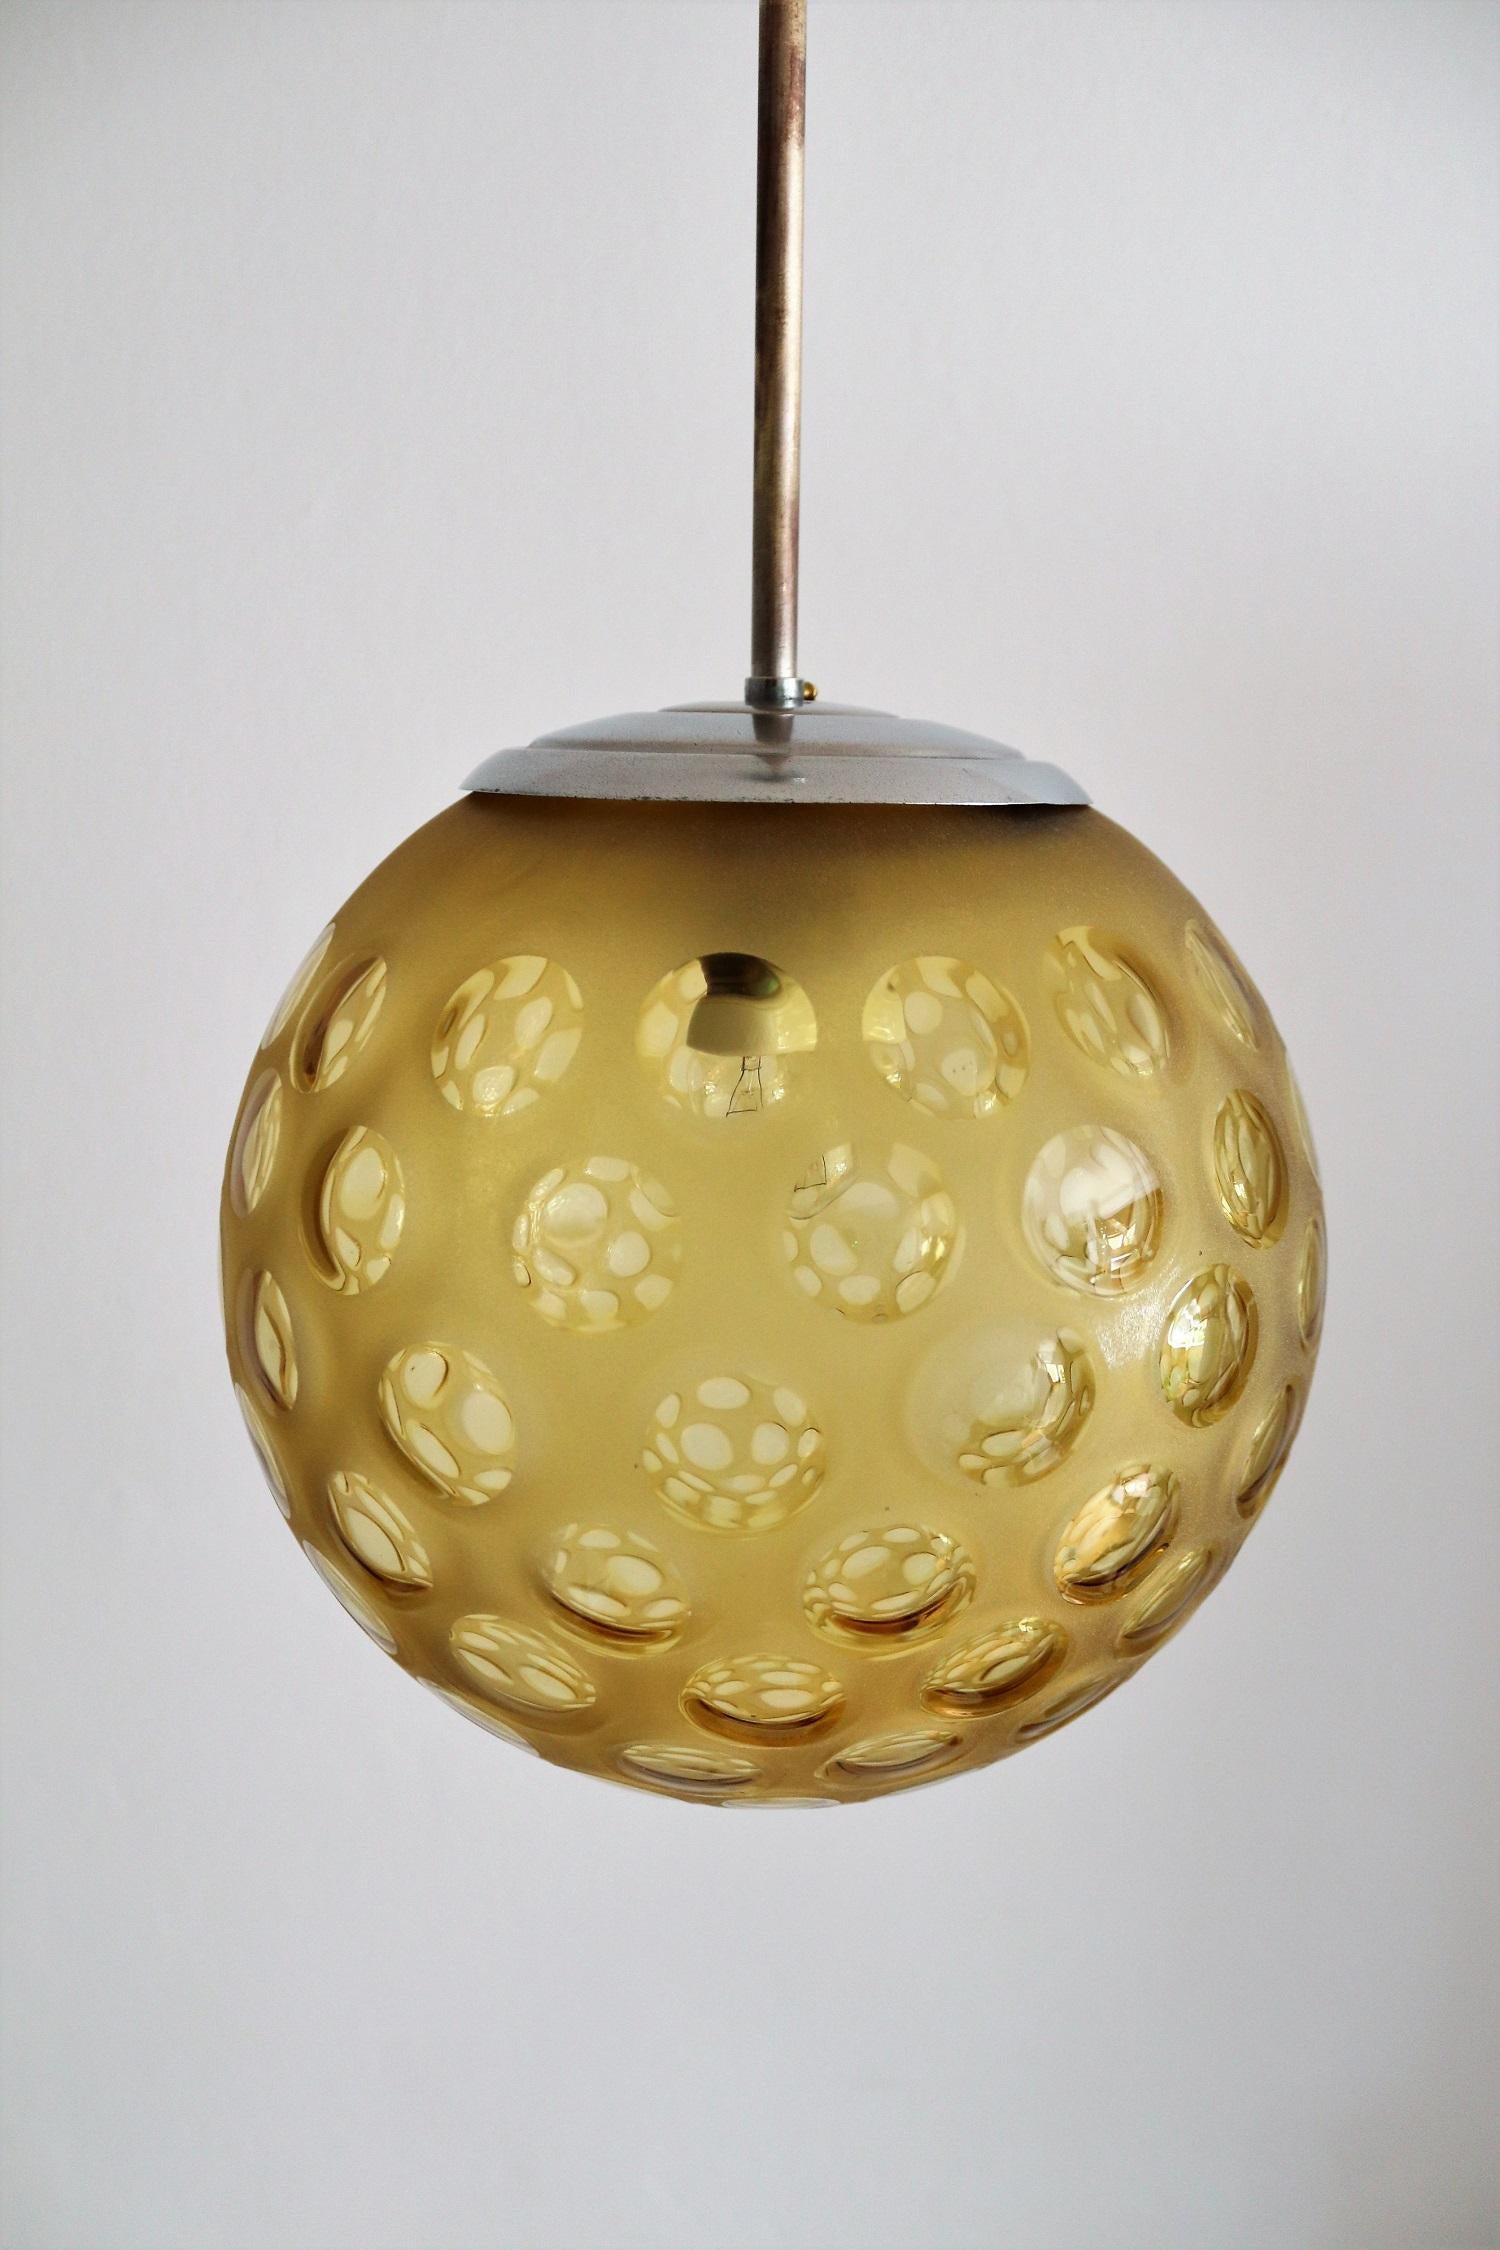 Italian Art Deco Pendant Lamp with Frosted Glass Globe, 1940s For Sale 4